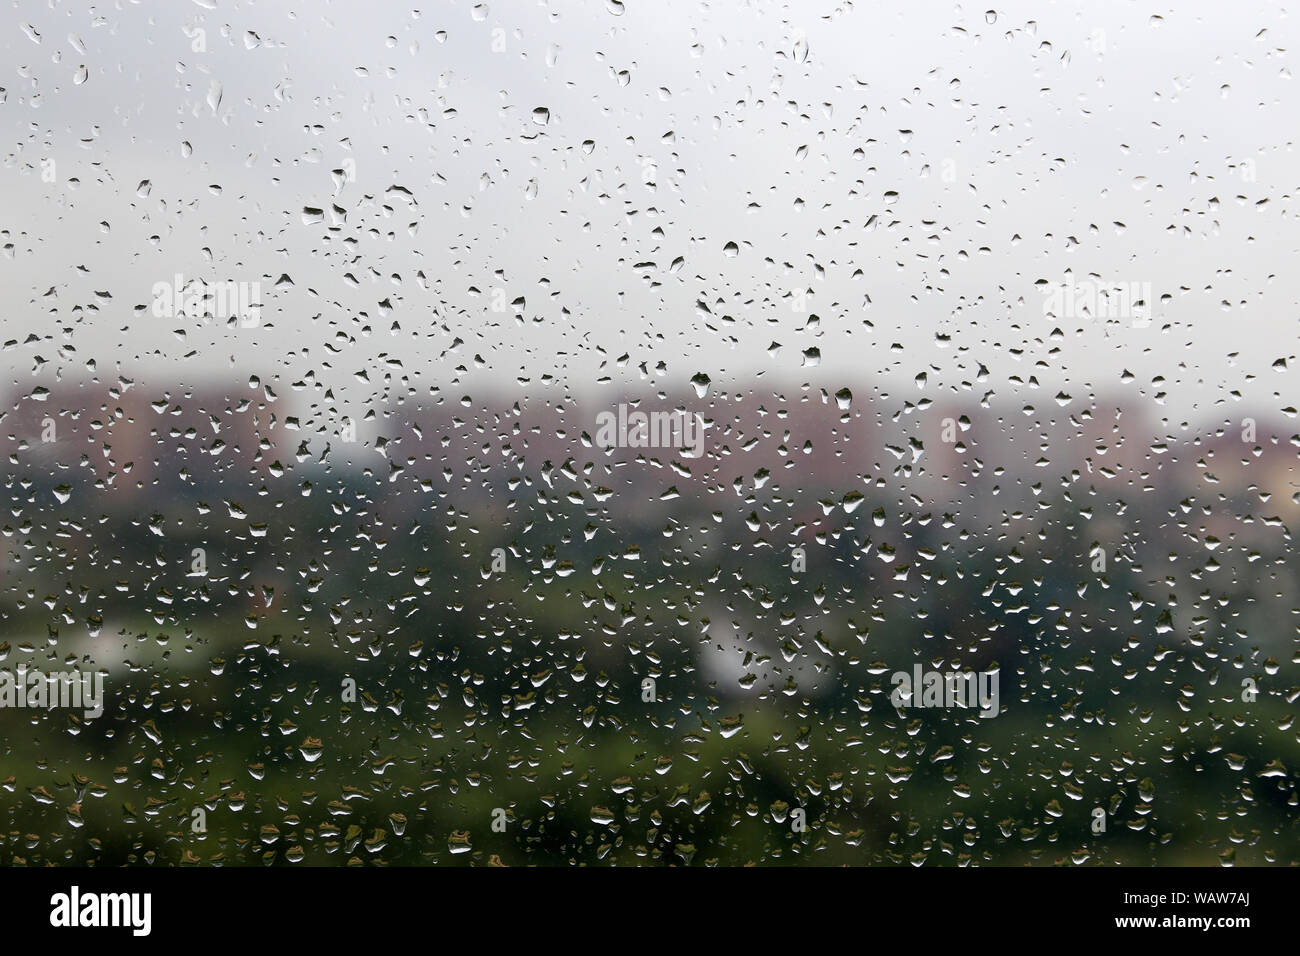 Water drops on the window glass on blurred background of city buildings and cloudy sky. Beautiful raindrops, rainy weather Stock Photo